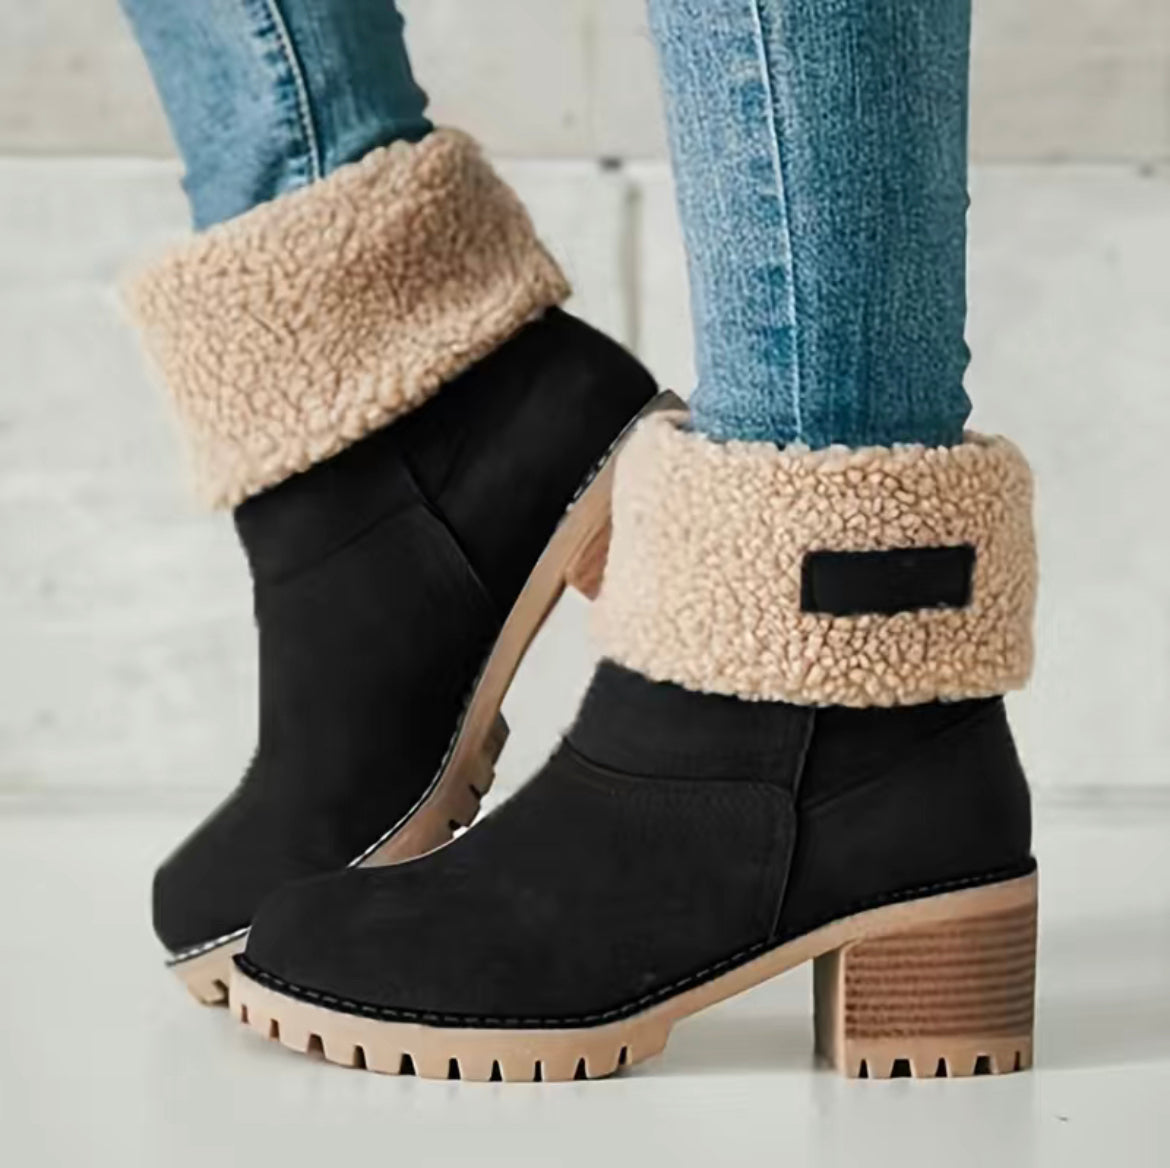 Heeled Snow boots : r/CrappyDesign